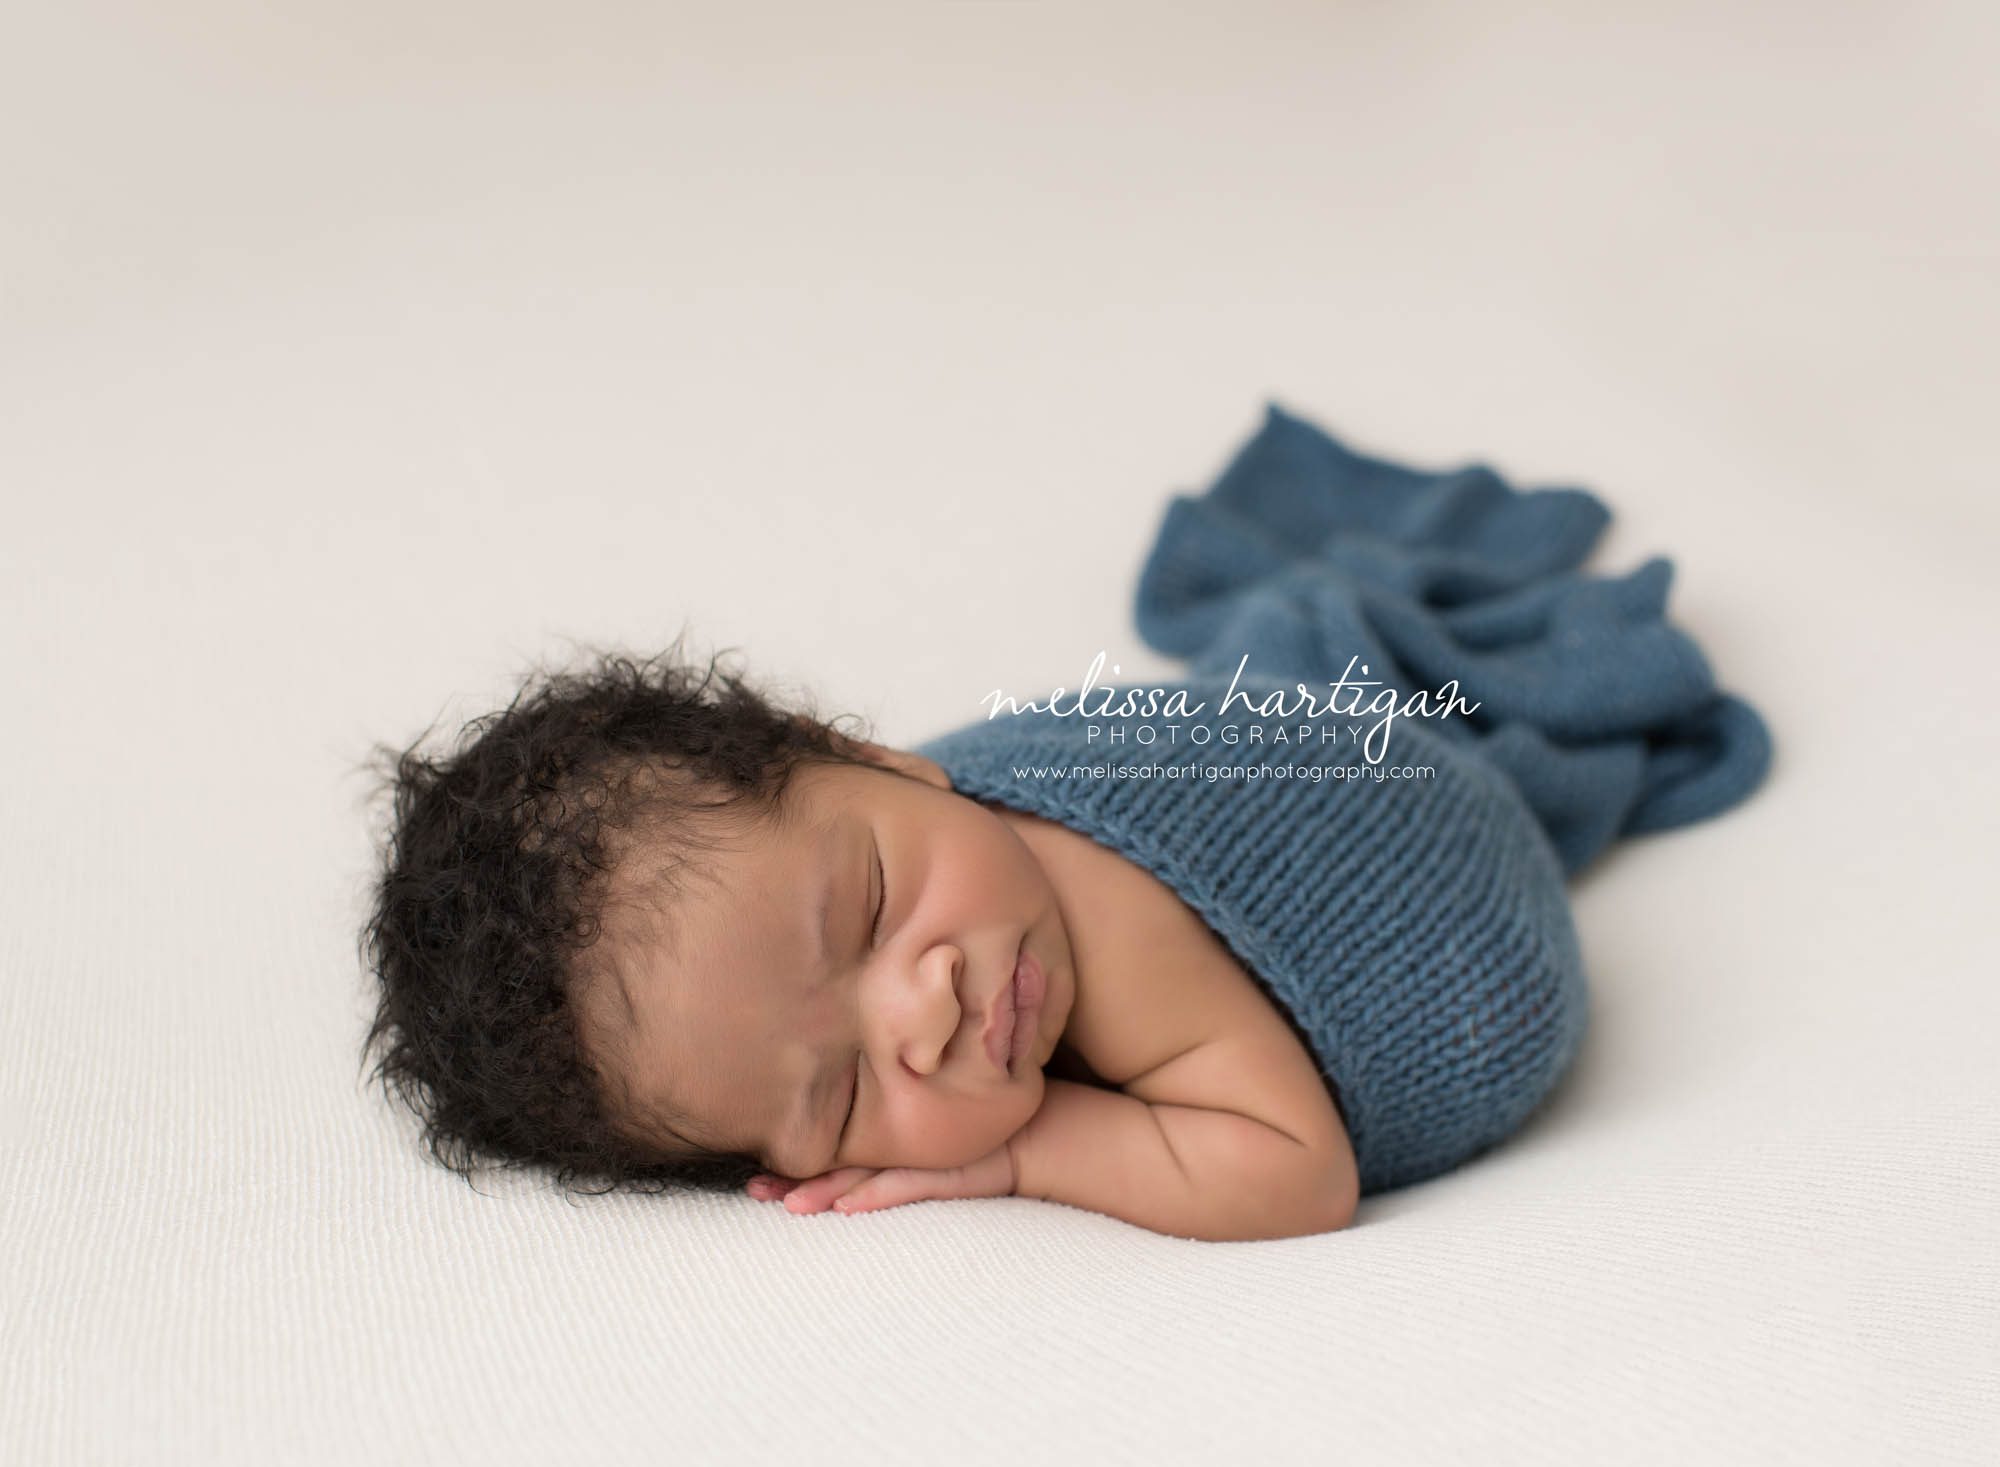 Melissa Hartigan Photography Connecticut Maternity and Newborn CT Photographer Coventry Ct Middlefield CT baby Fairfield county Newborn pose baby boy sleeping on ivory blanket with blue knitted wrap